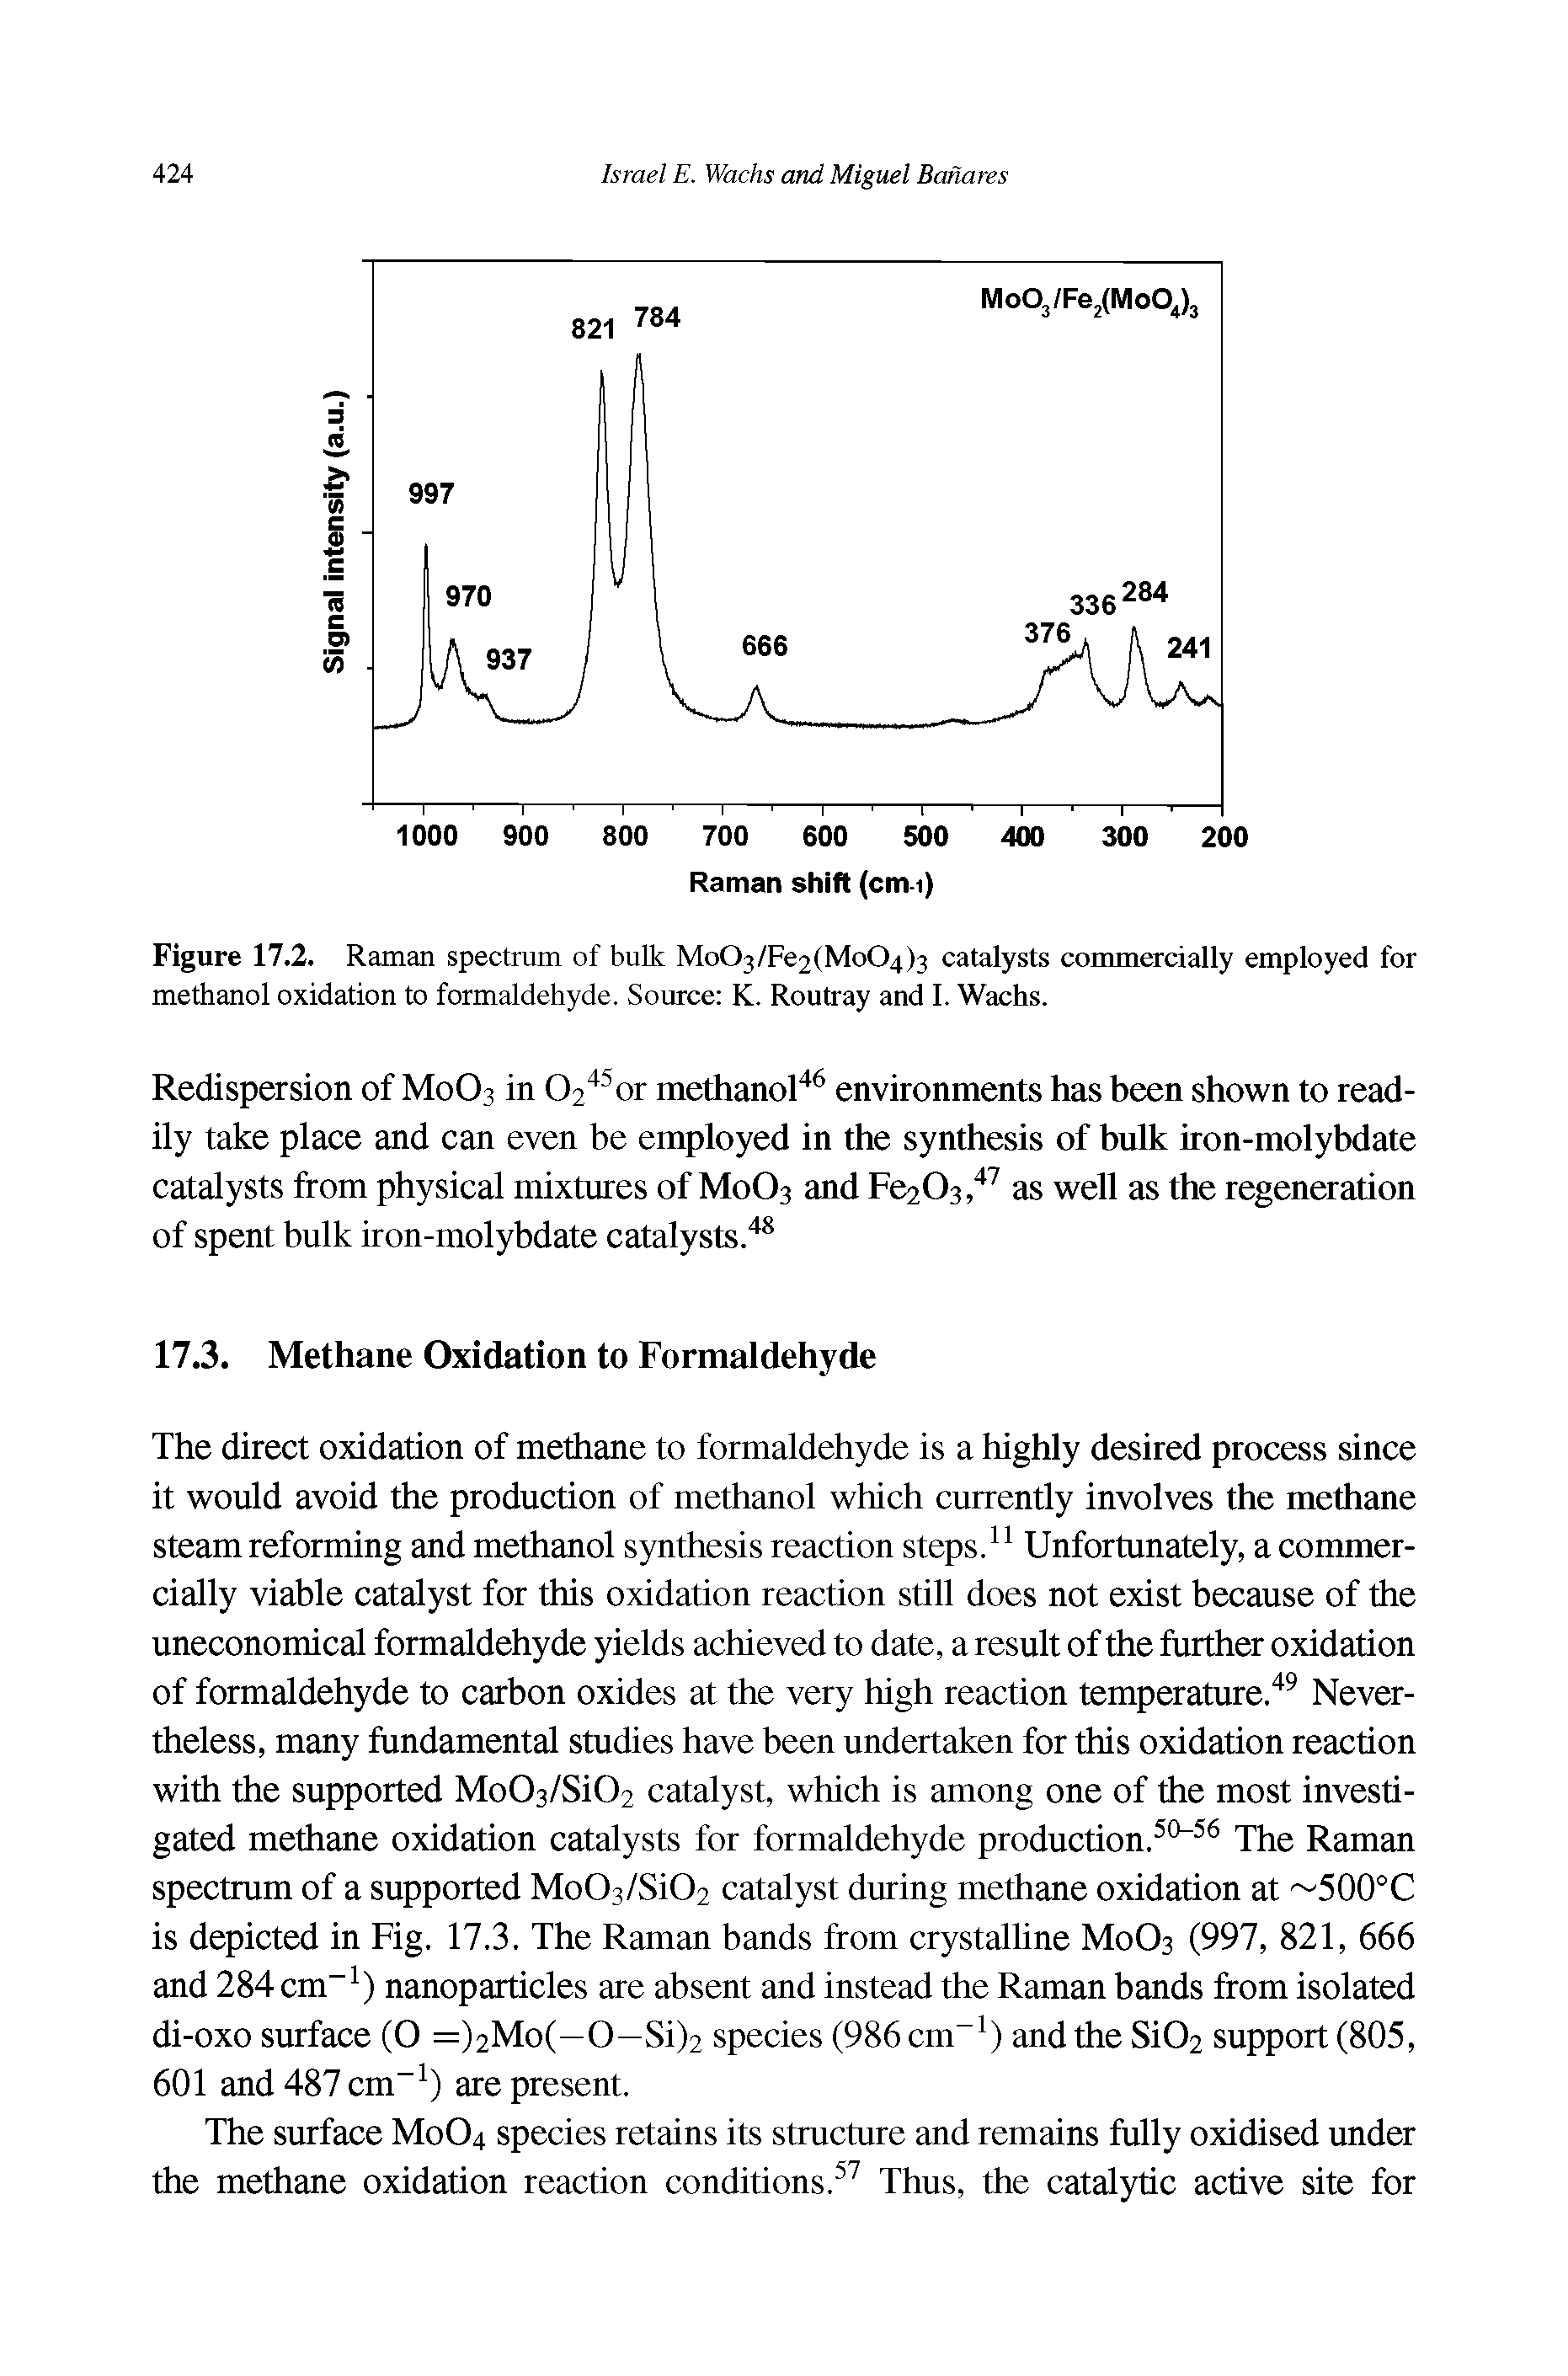 Figure 17.2. Raman spectrum of bulk Mo03/Fe2(Mo04)3 catalysts commercially employed for methanol oxidation to formaldehyde. Source K. Routray and 1. Wachs.